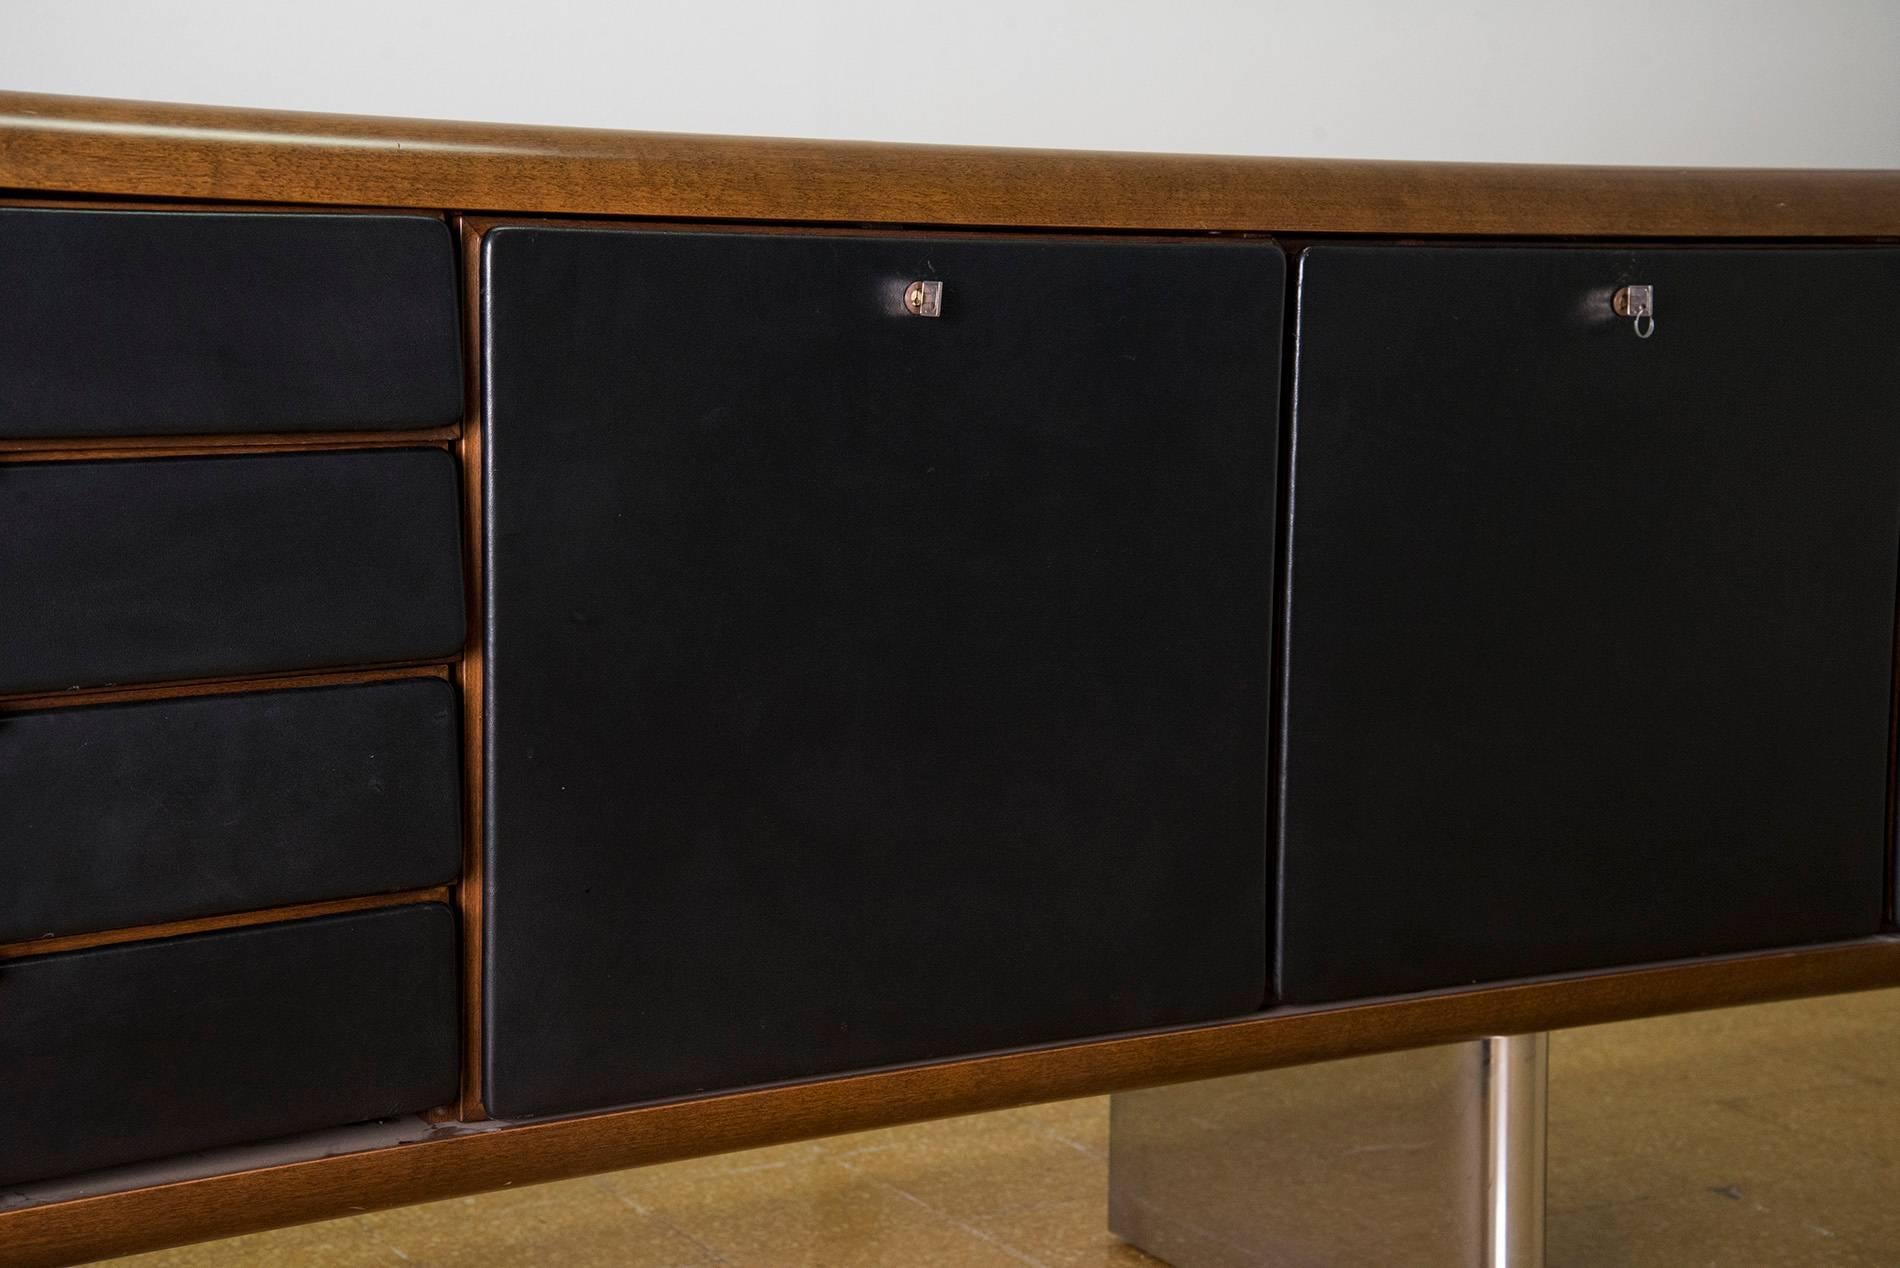 Pair of large sideboards designed by Hans Von Klier for Skipper in 1970. Stainless steel legs, walnut structure, doors and drawers covered with black leather. Four drawers and three cabinets with shelves and organizing elements. Good original